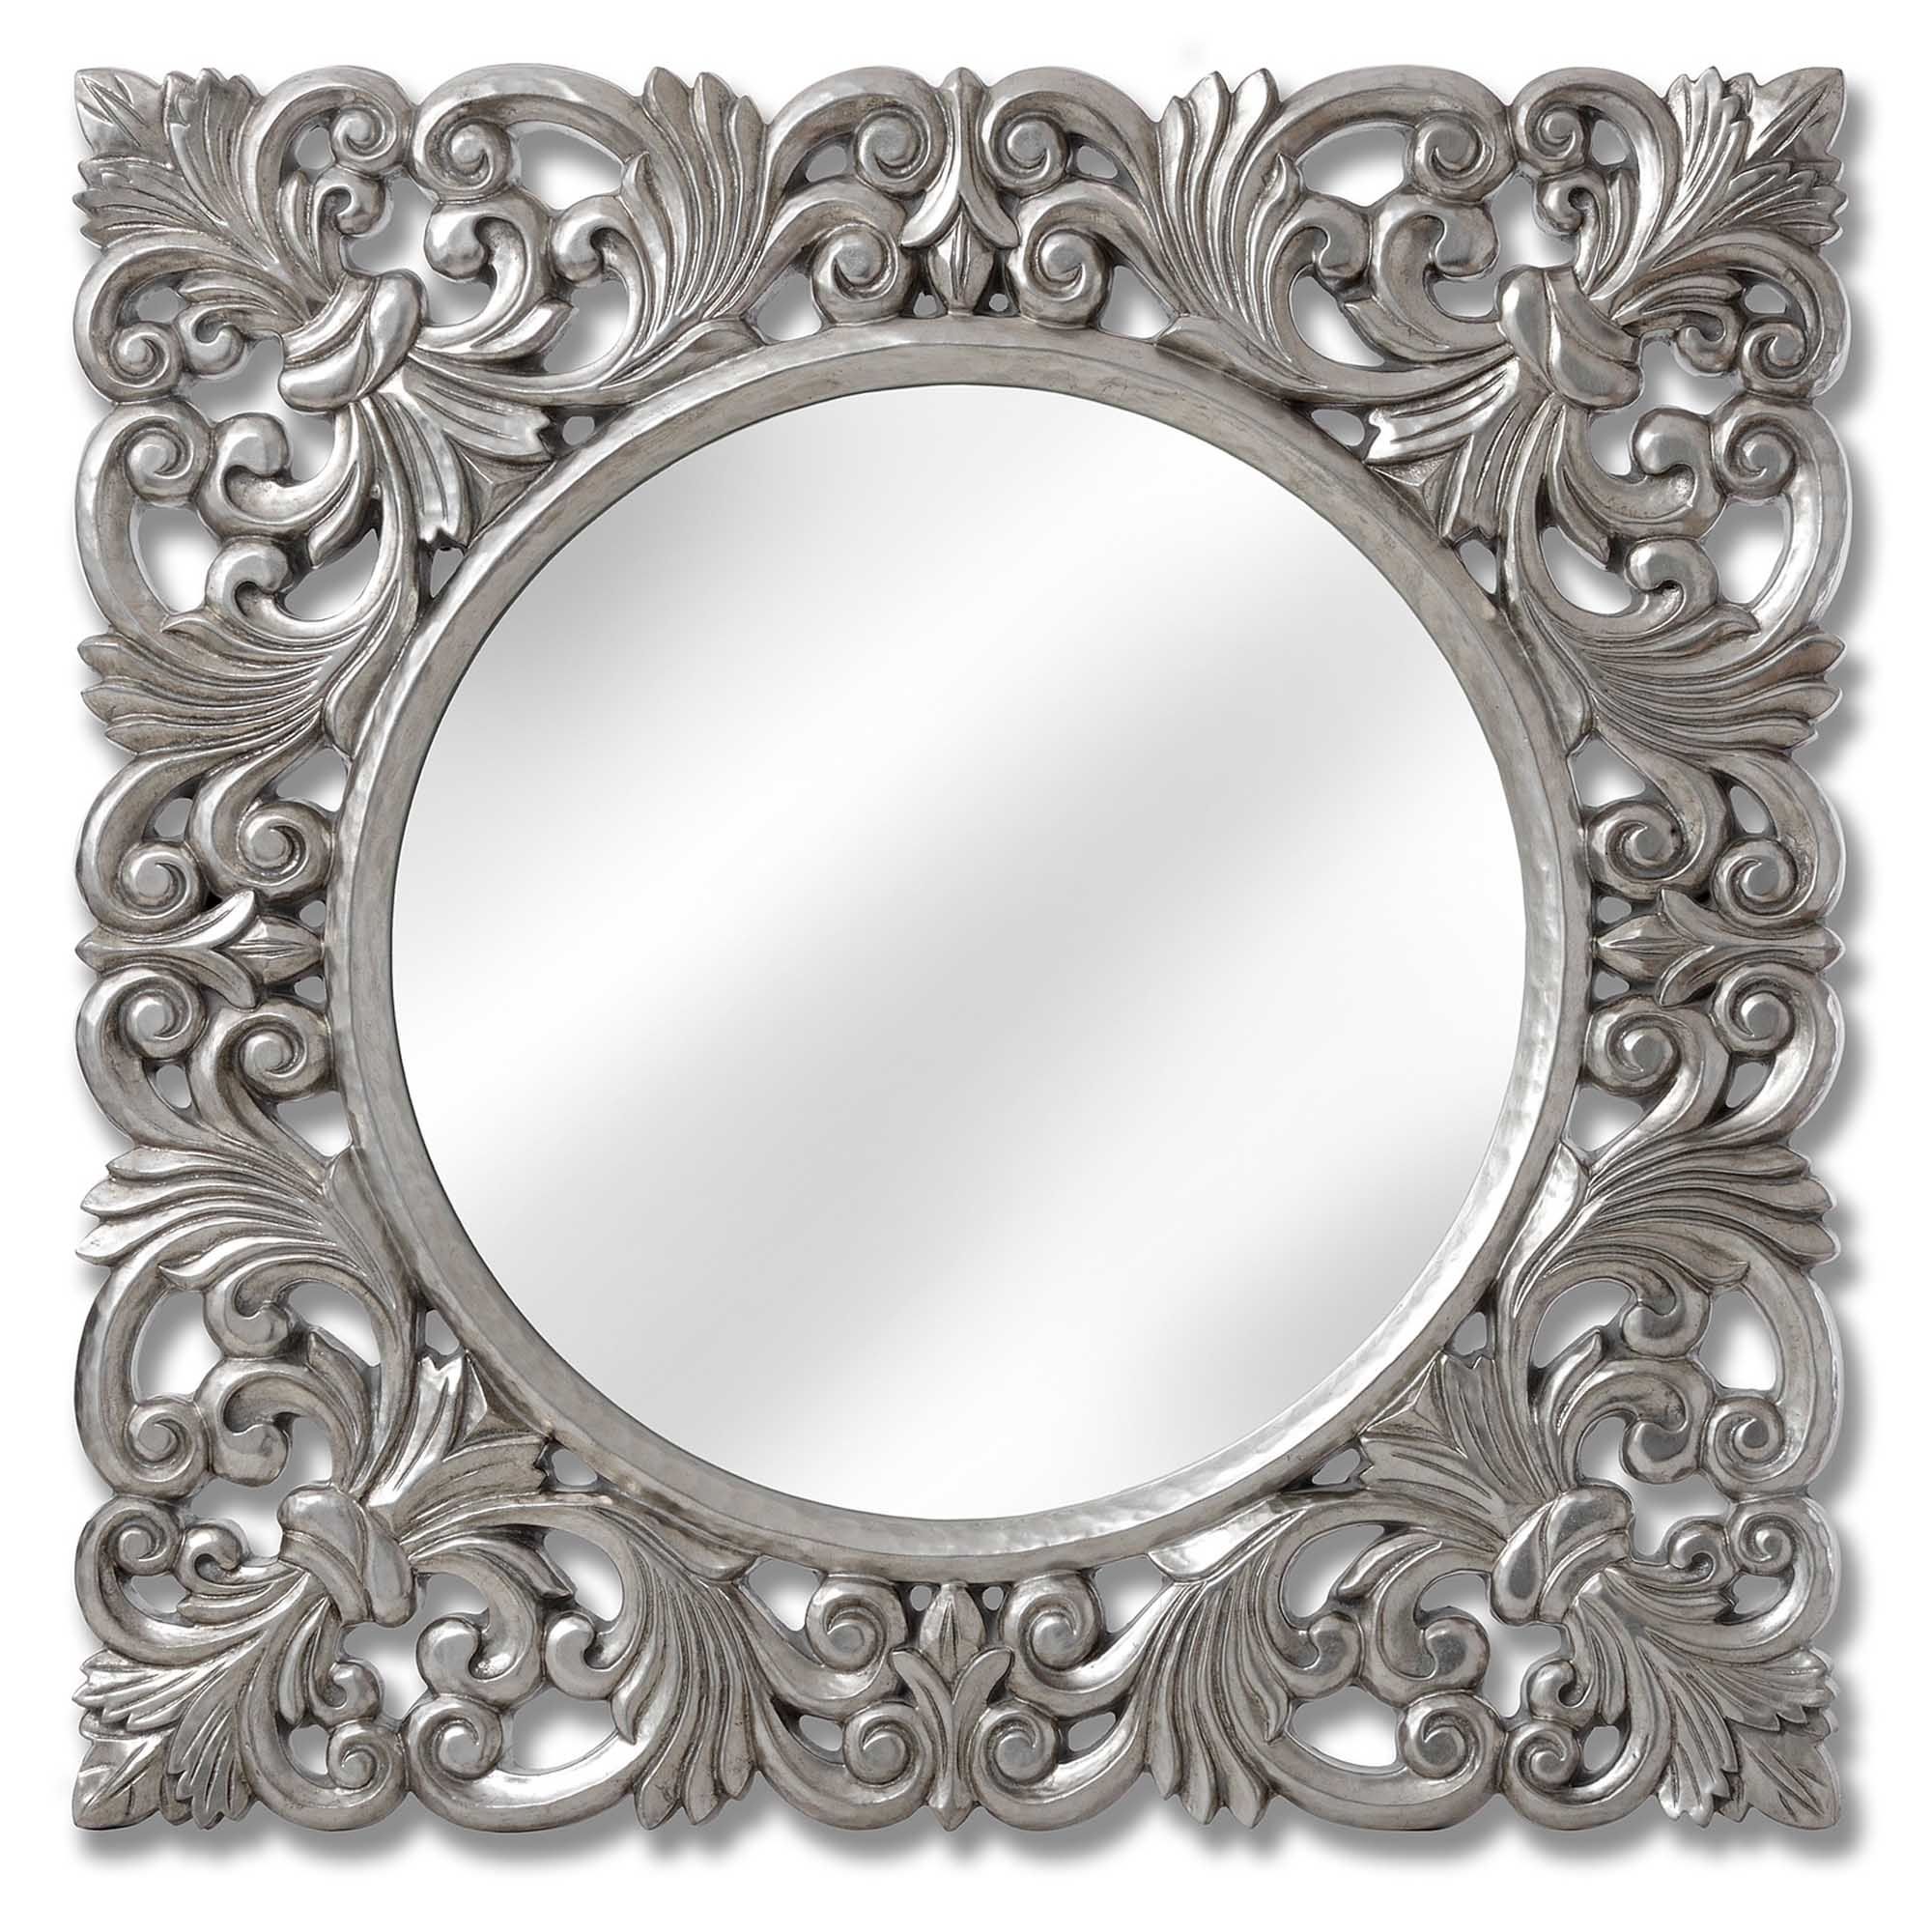 Baroque Antique French Style Silver Wall Mirror | Homesdirect365 With Regard To Antiqued Glass Wall Mirrors (View 14 of 15)